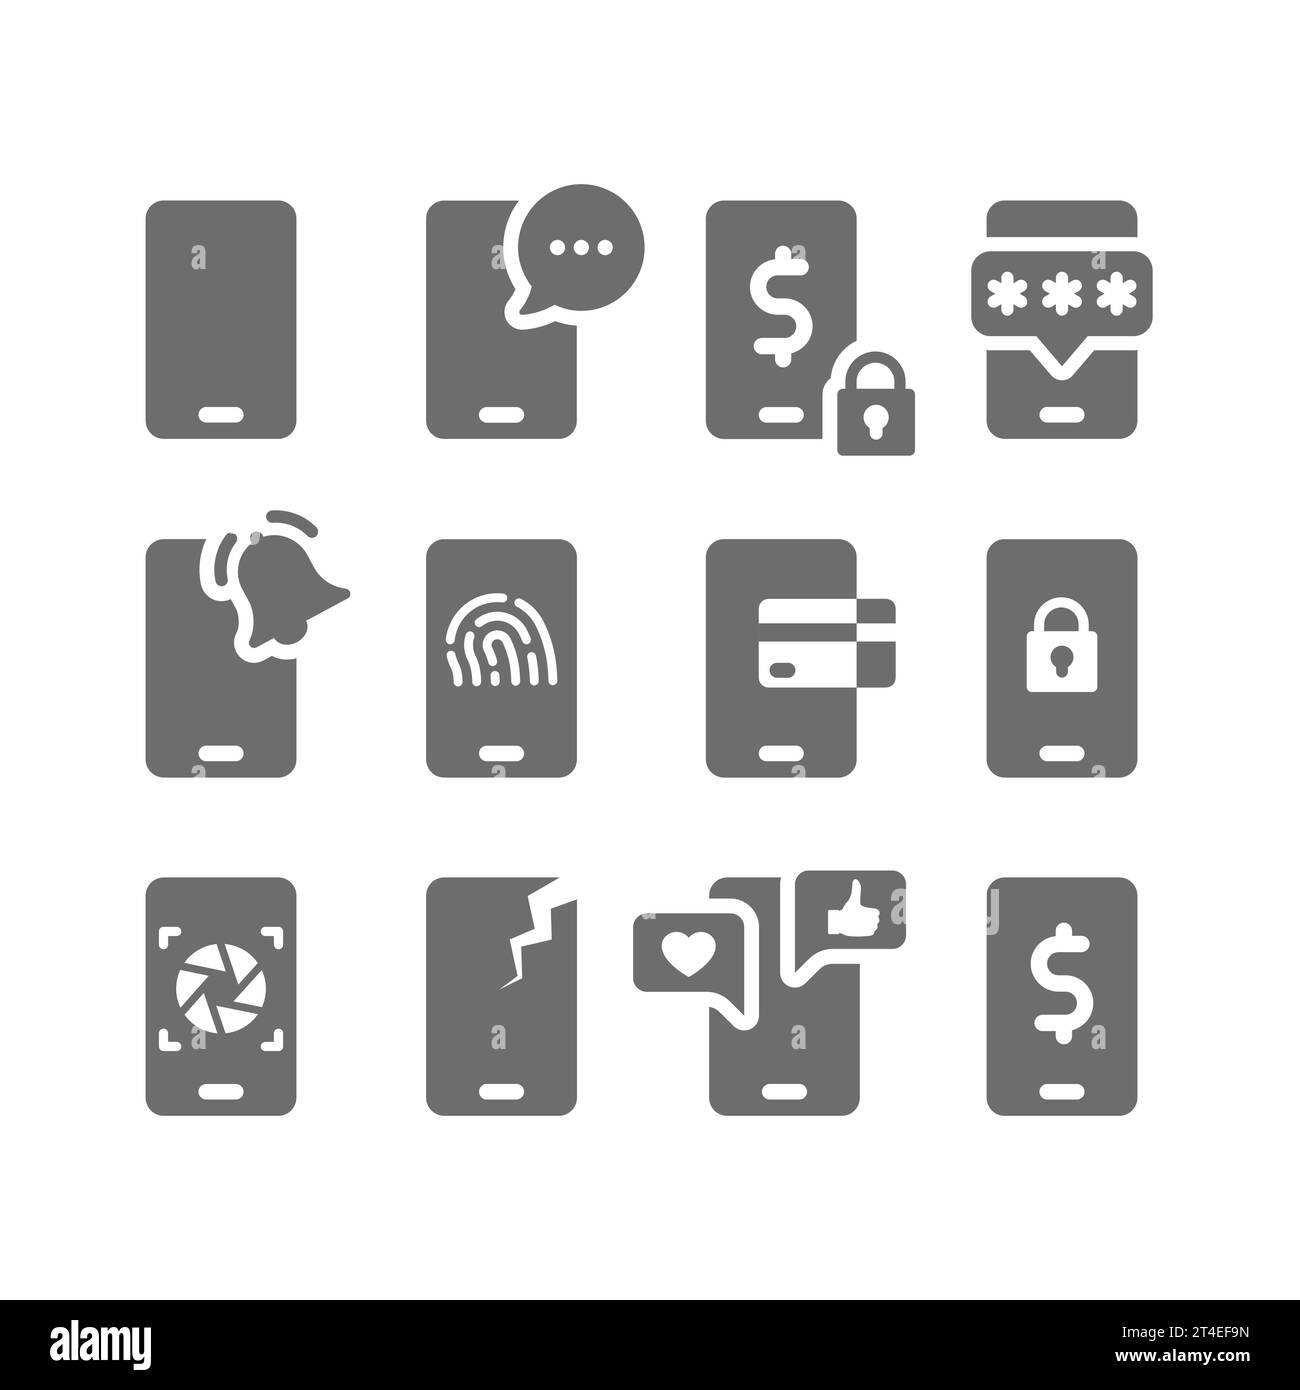 Smartphone with payment, social media and password icon set. Using phone and usage vector icons. Stock Vector